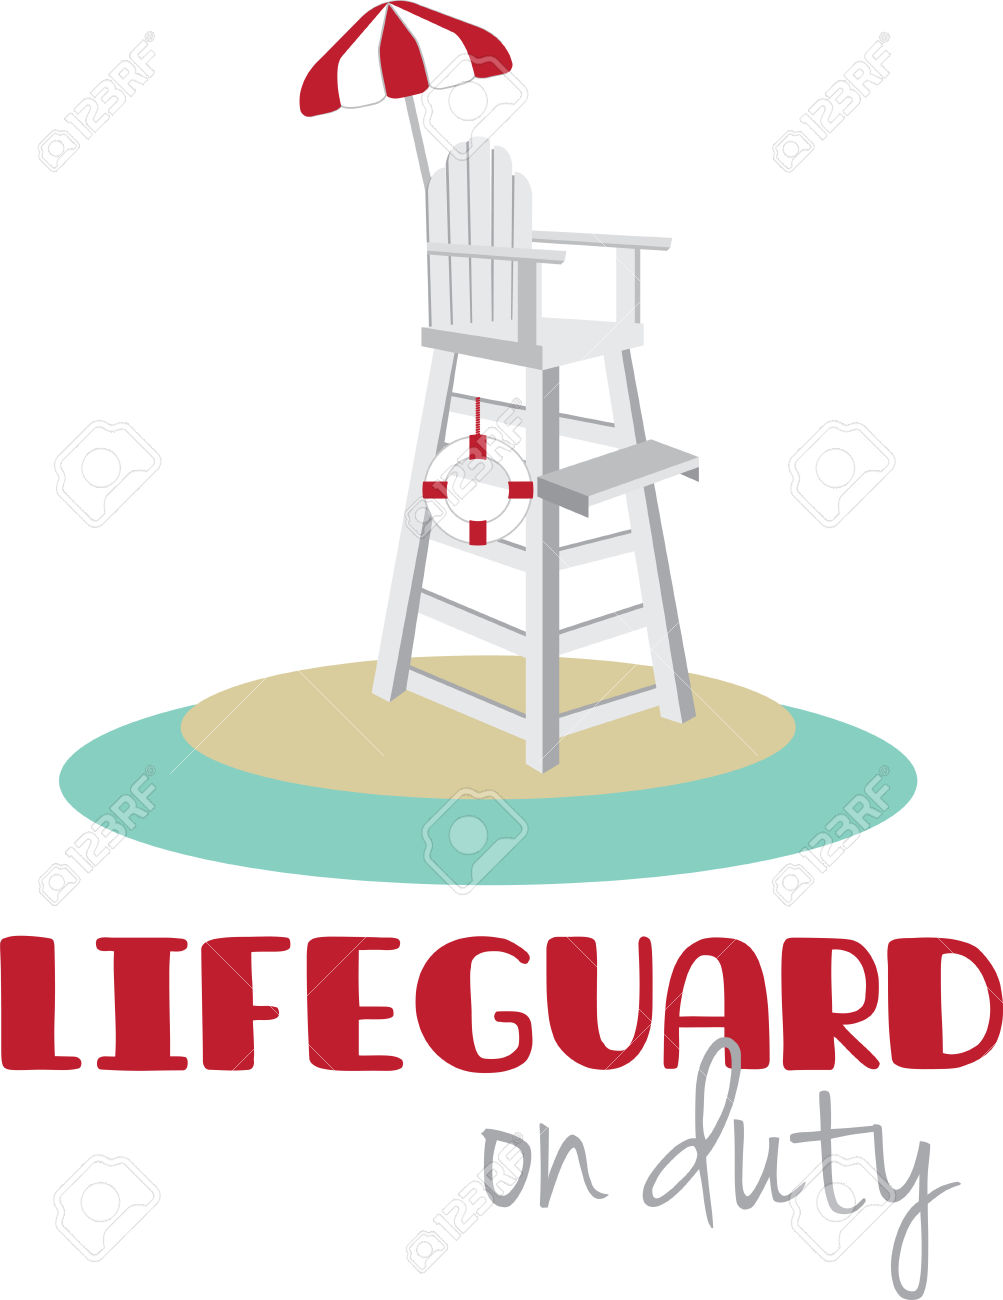 Collection of Lifeguard clipart | Free download best Lifeguard clipart